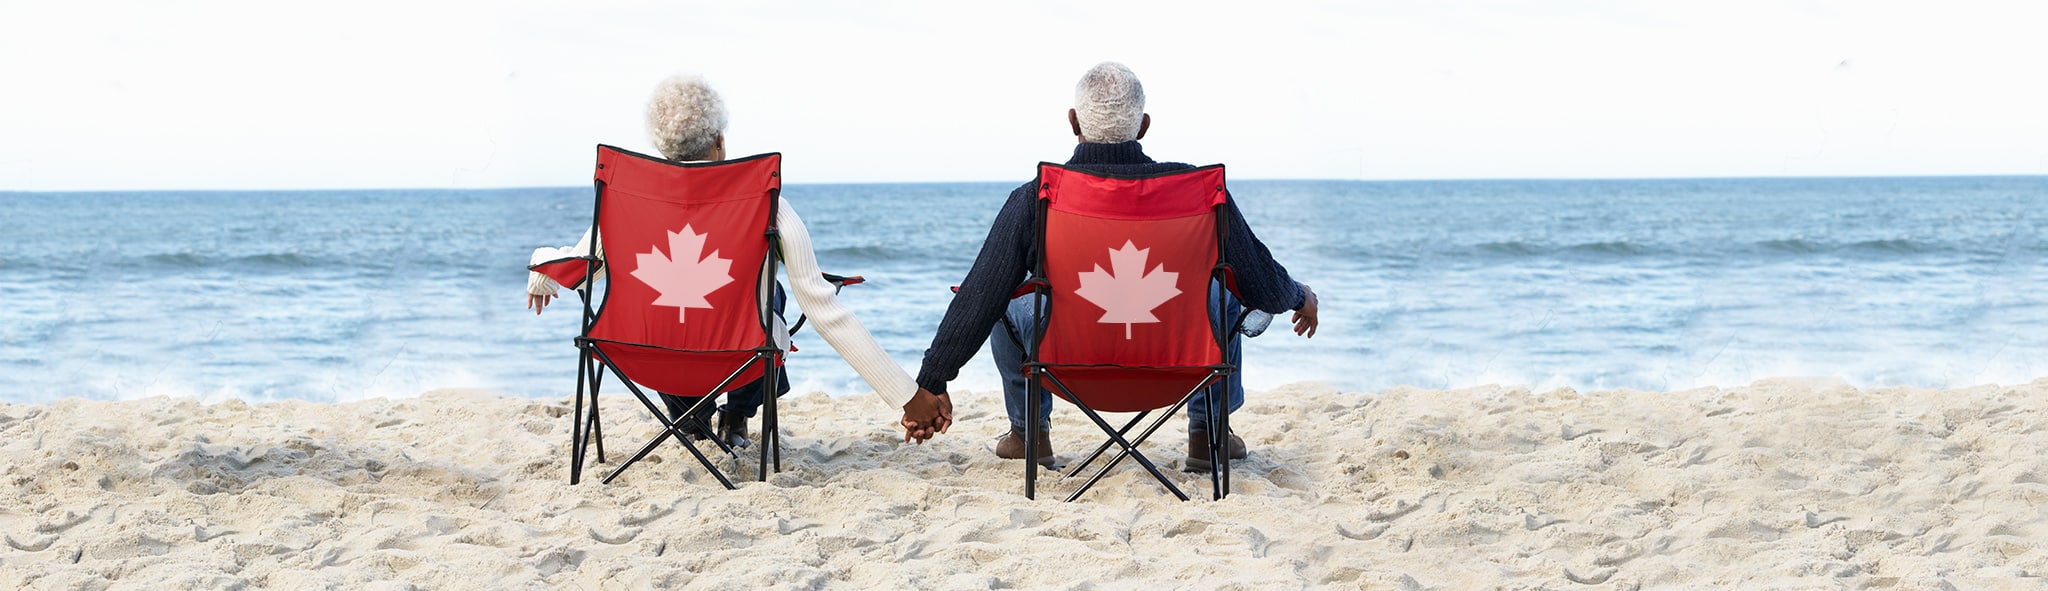 Senior Couple Sitting On Beach In Deck chairs